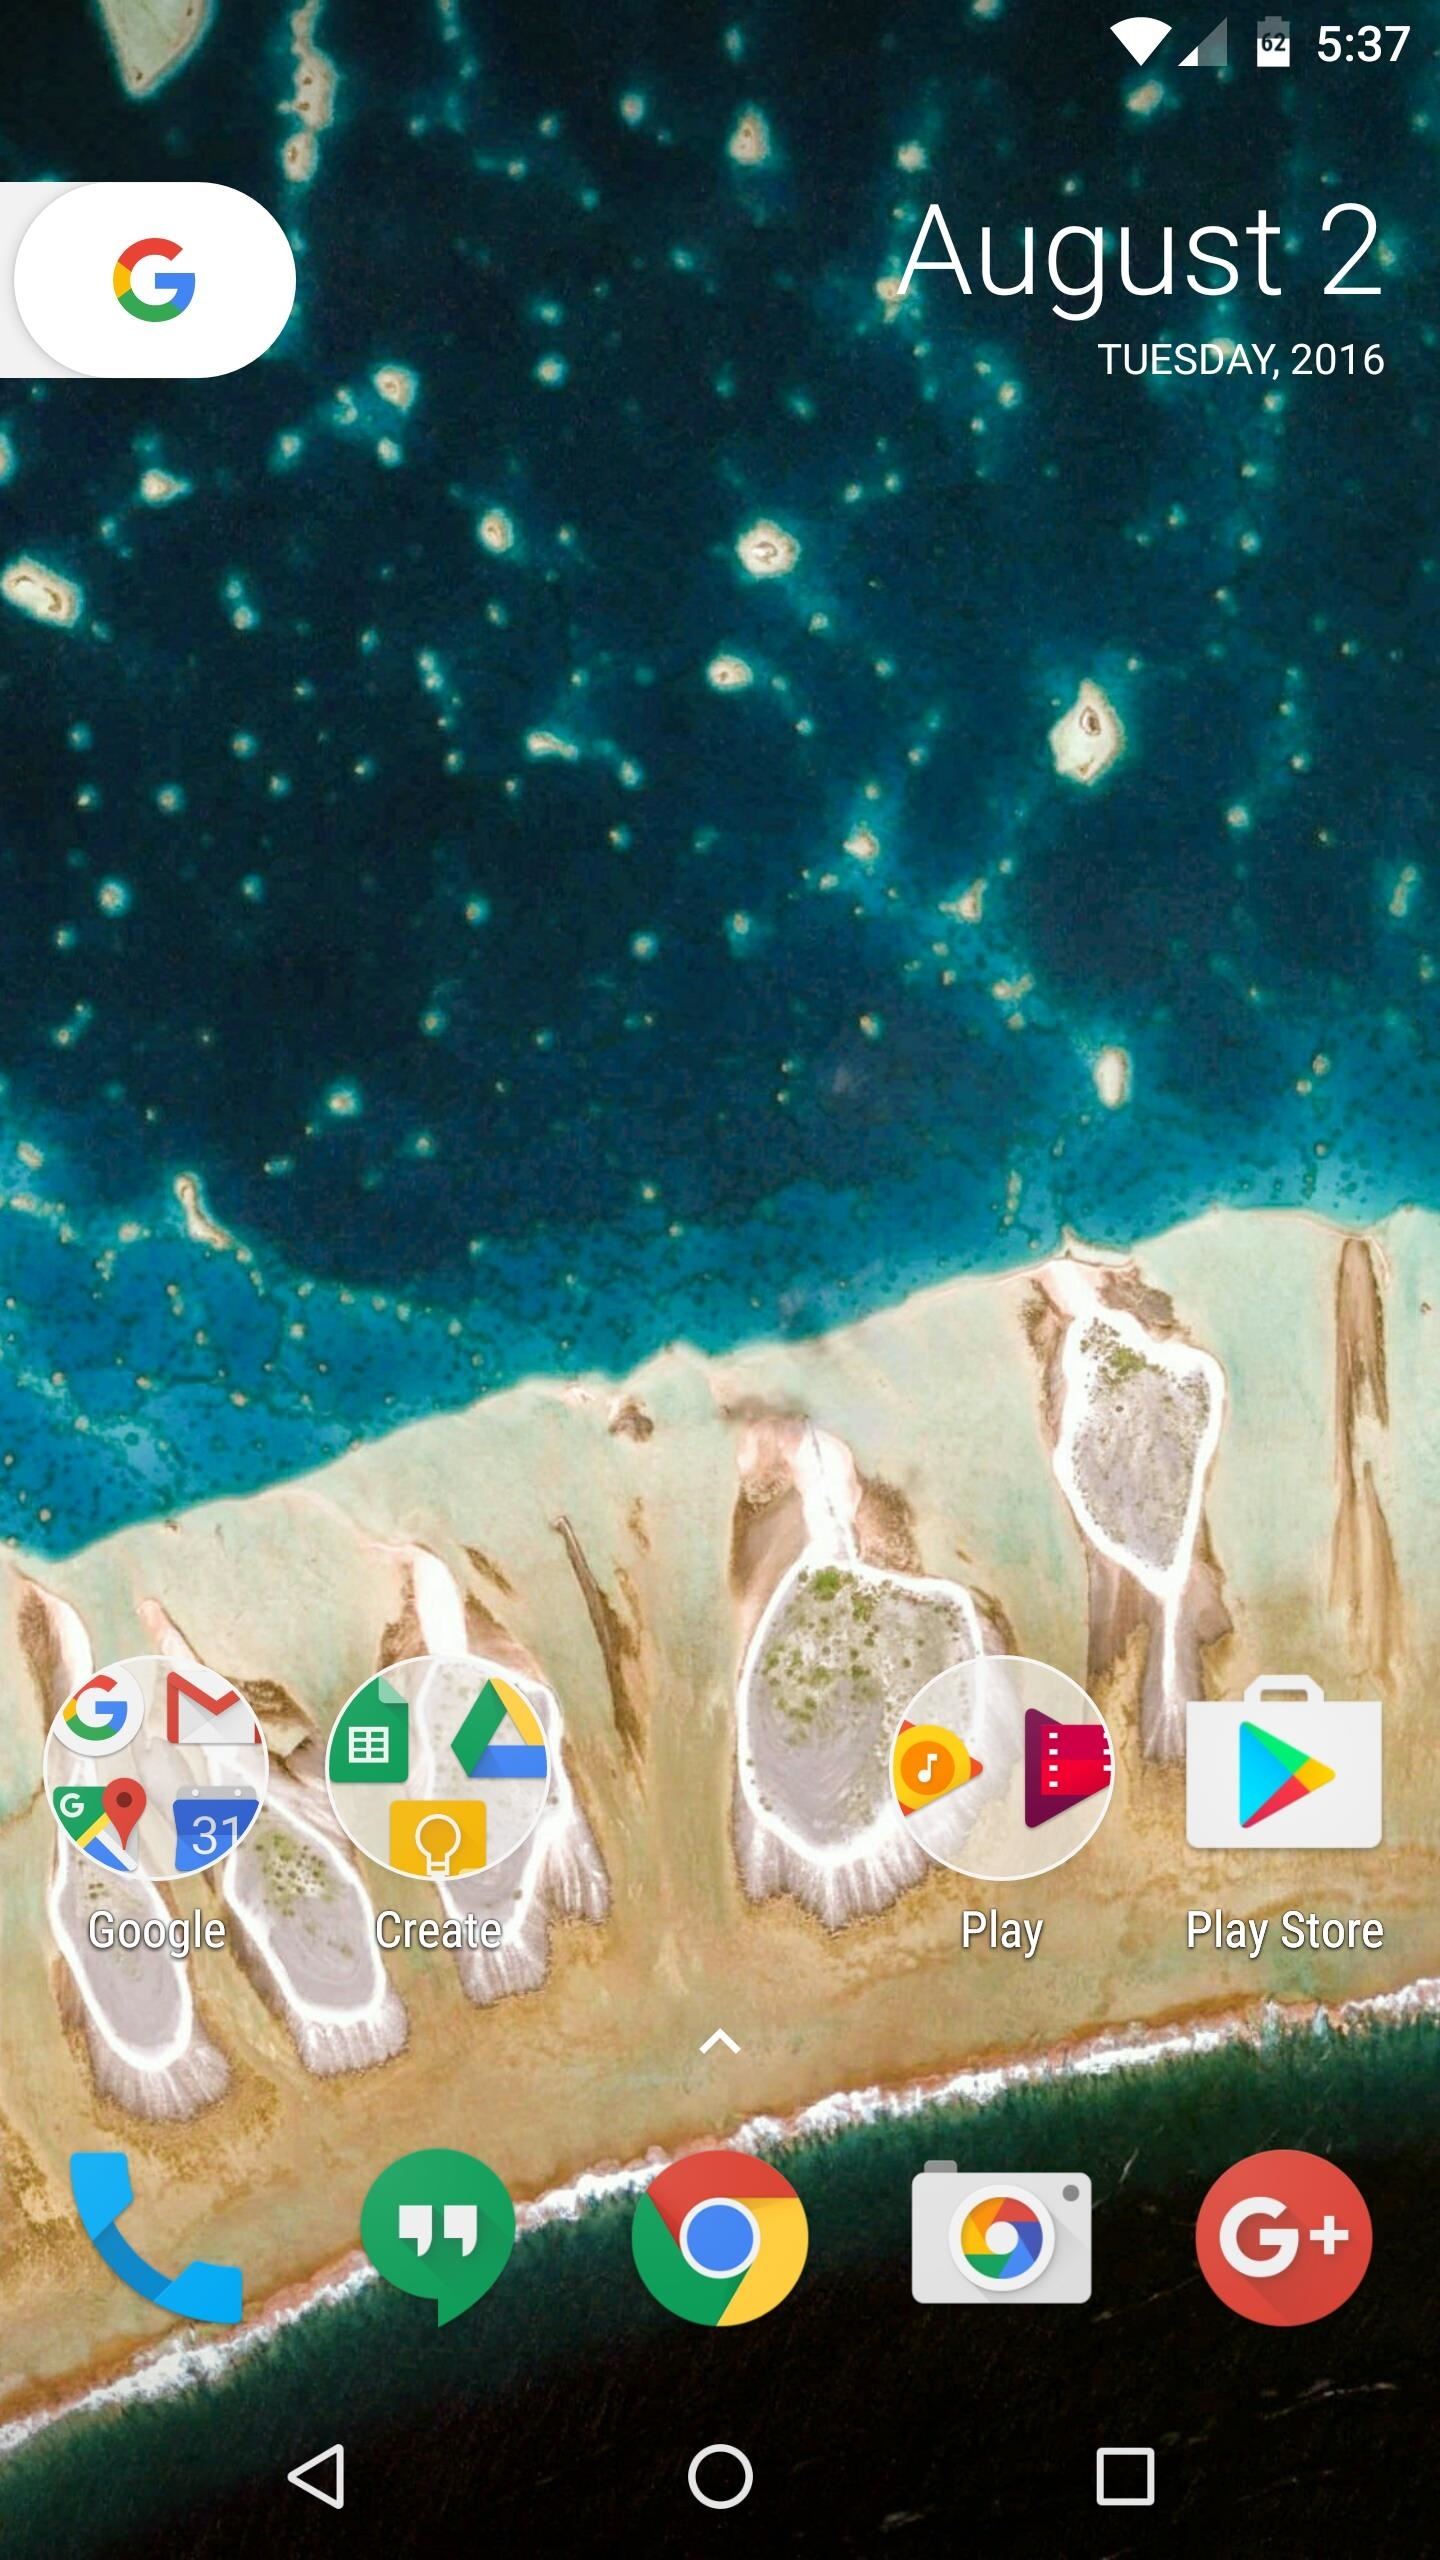 Get Google's Brand New Pixel Launcher on Any Android Device